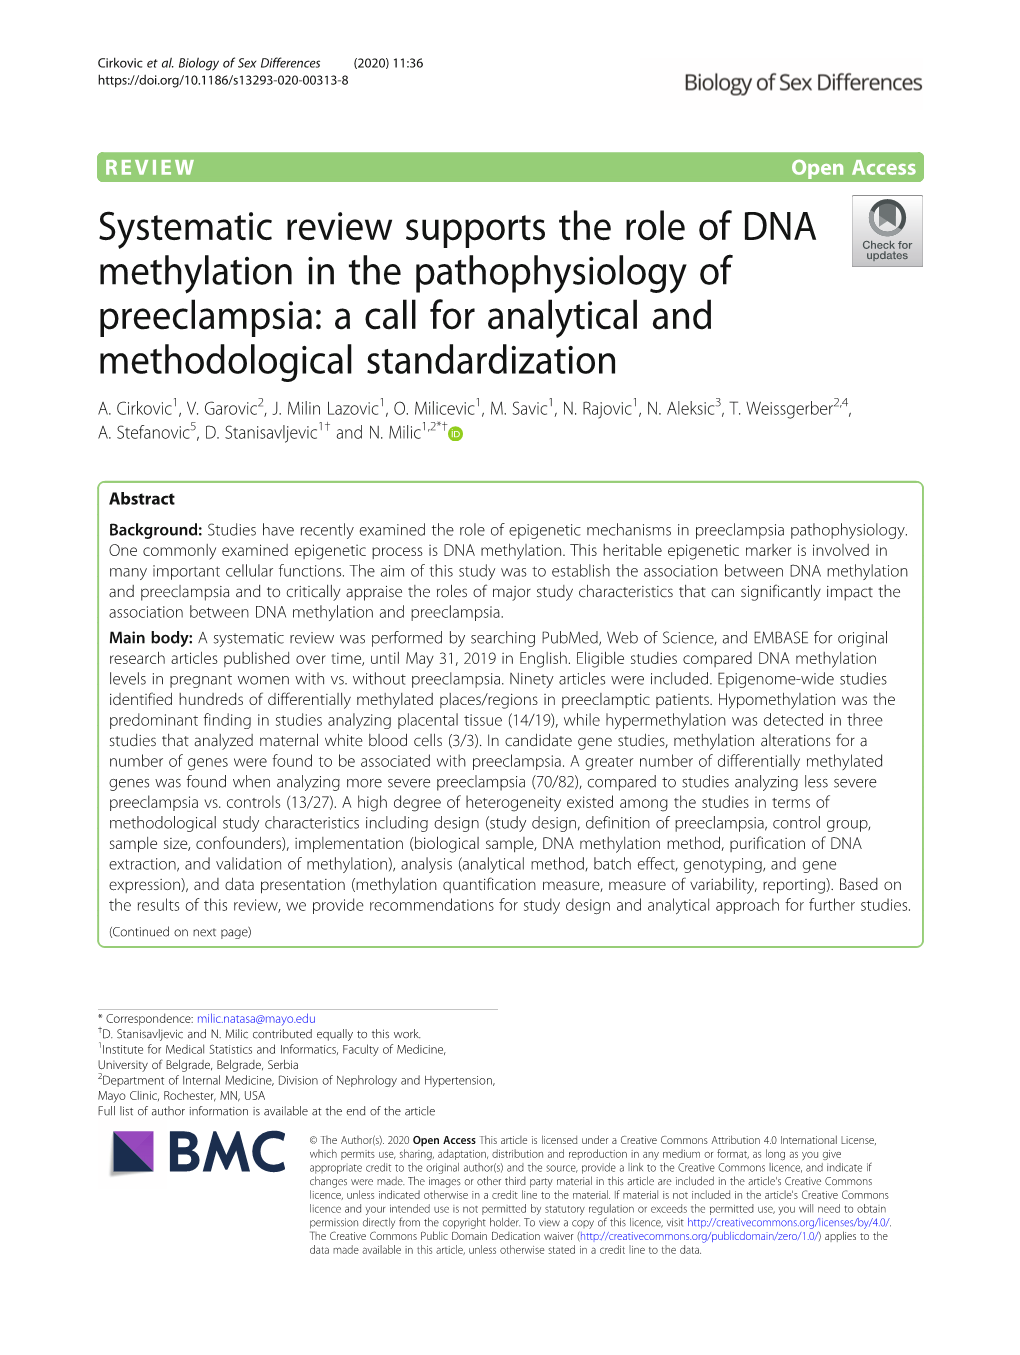 Systematic Review Supports the Role of DNA Methylation in the Pathophysiology of Preeclampsia: a Call for Analytical and Methodological Standardization A